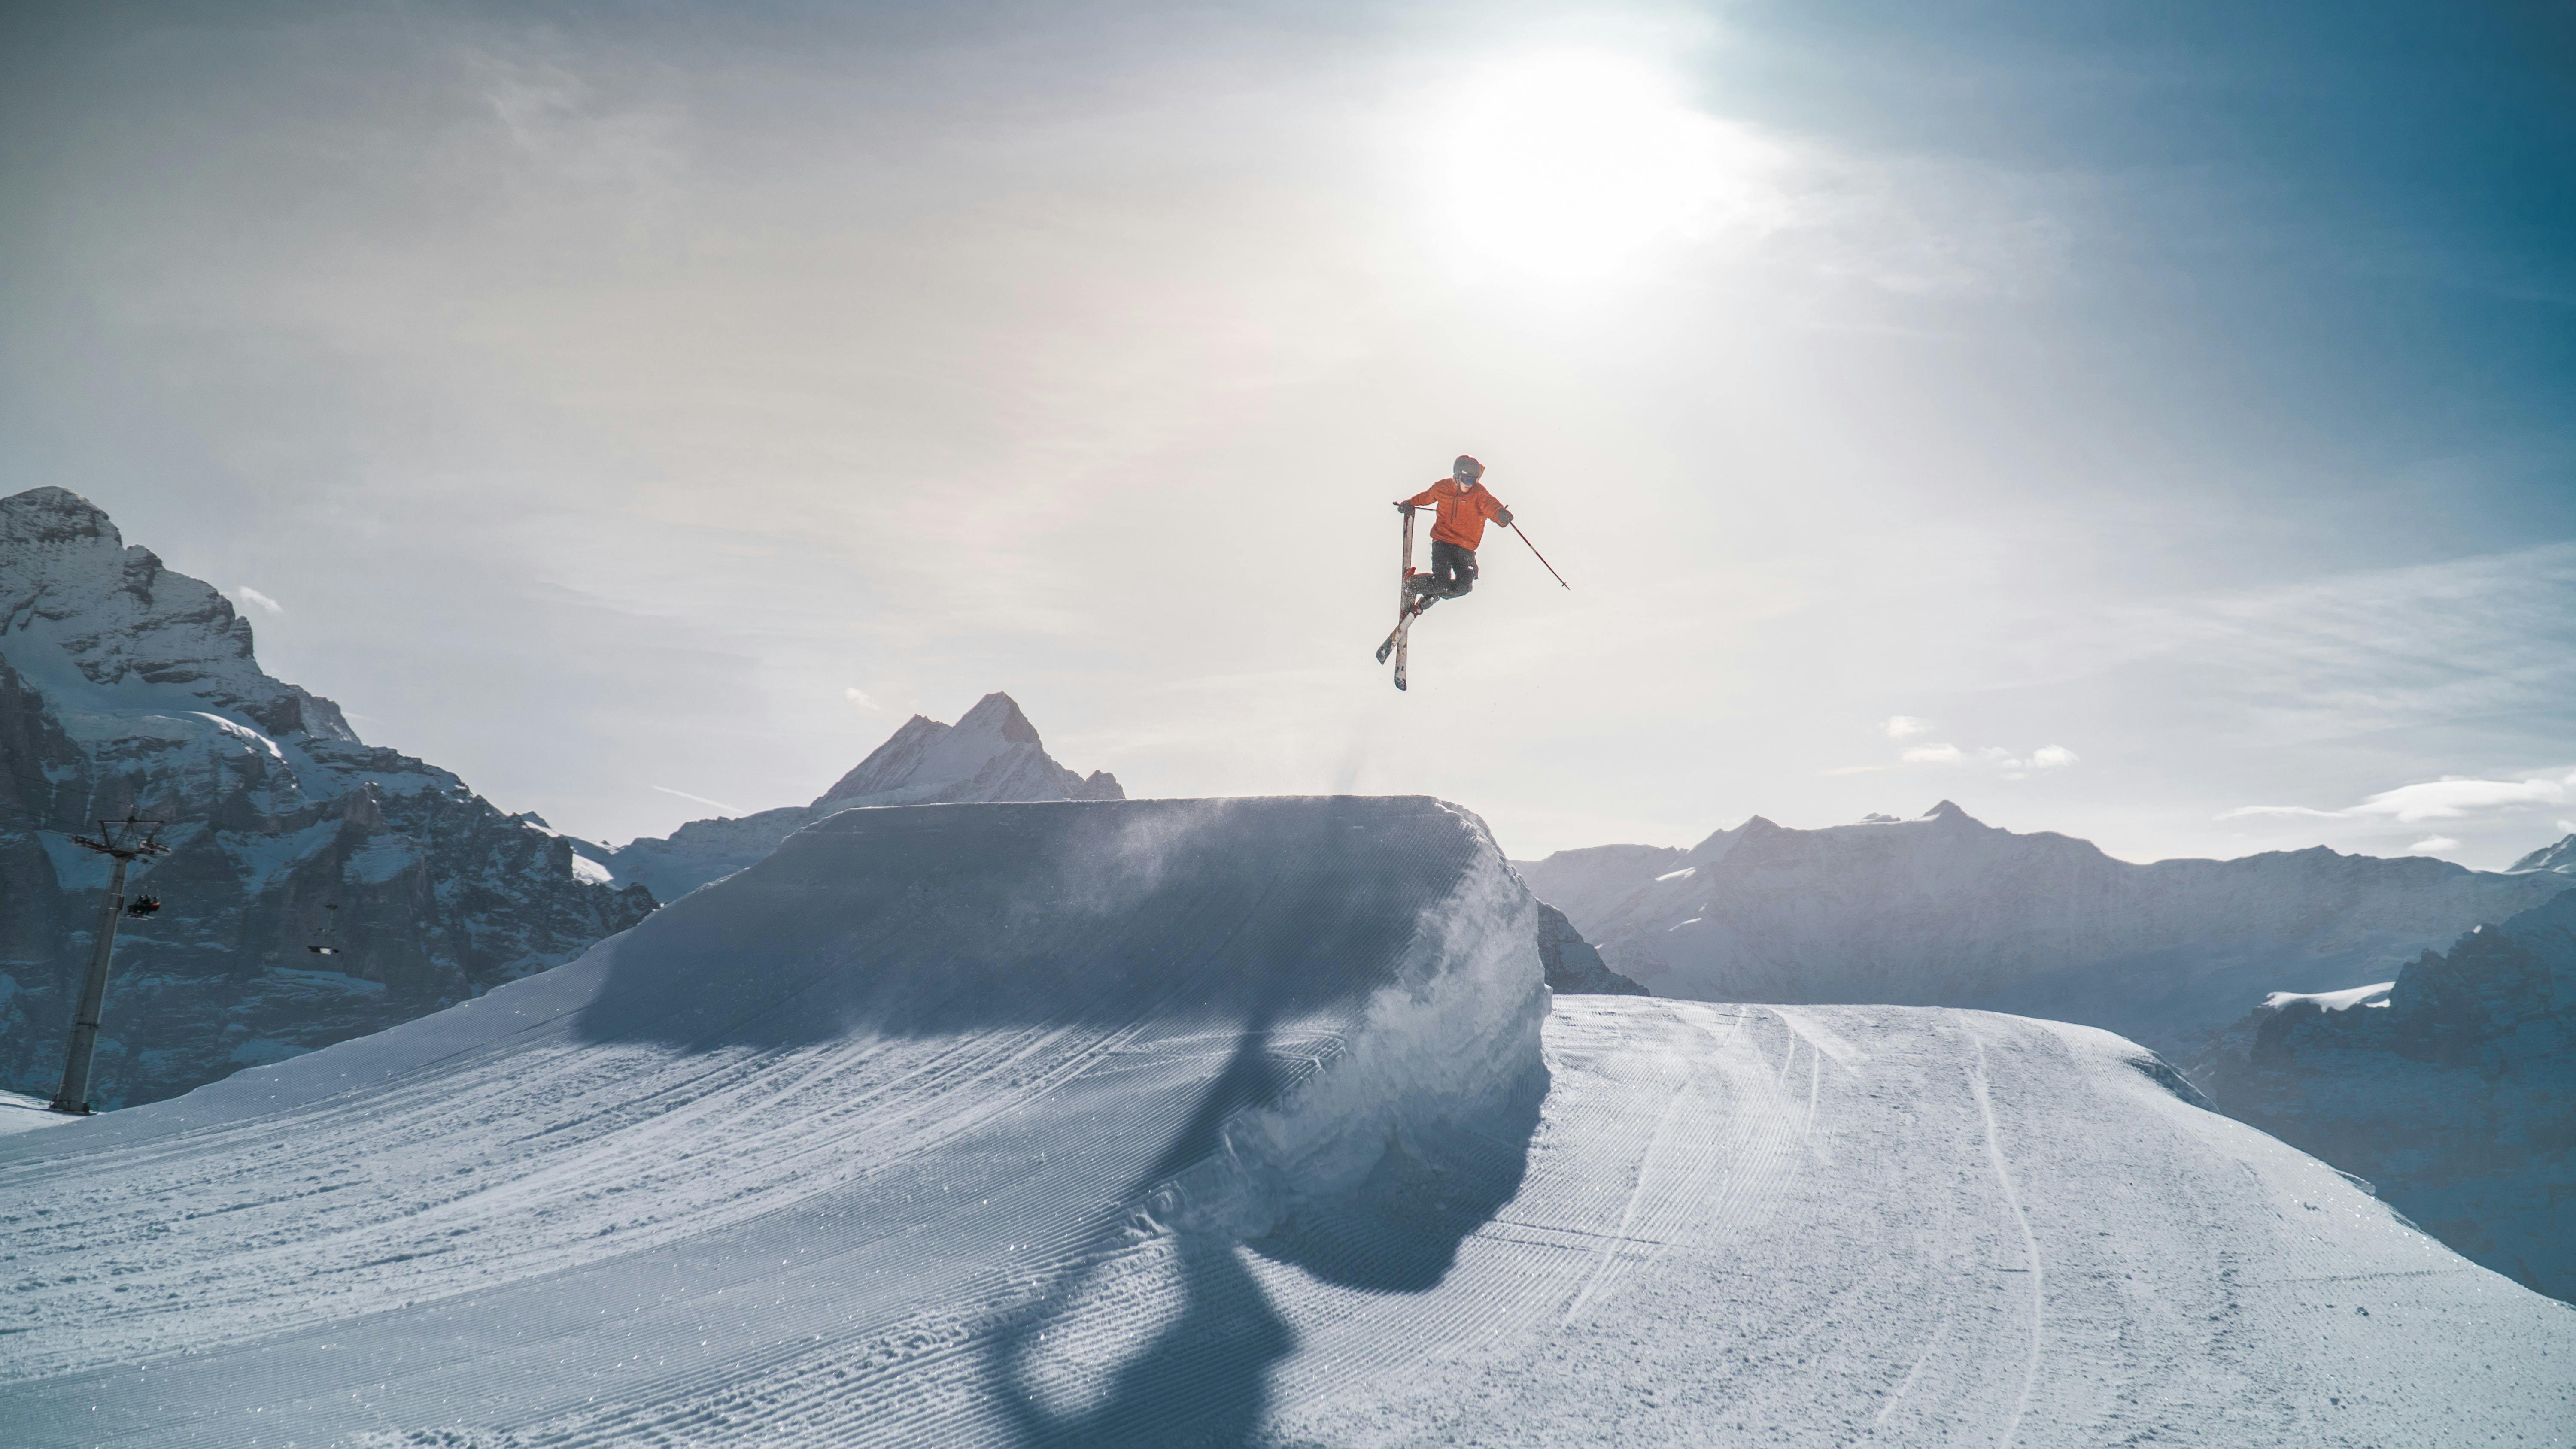 A skier in an orange jacket crosses their skis behind them as they execute a jump